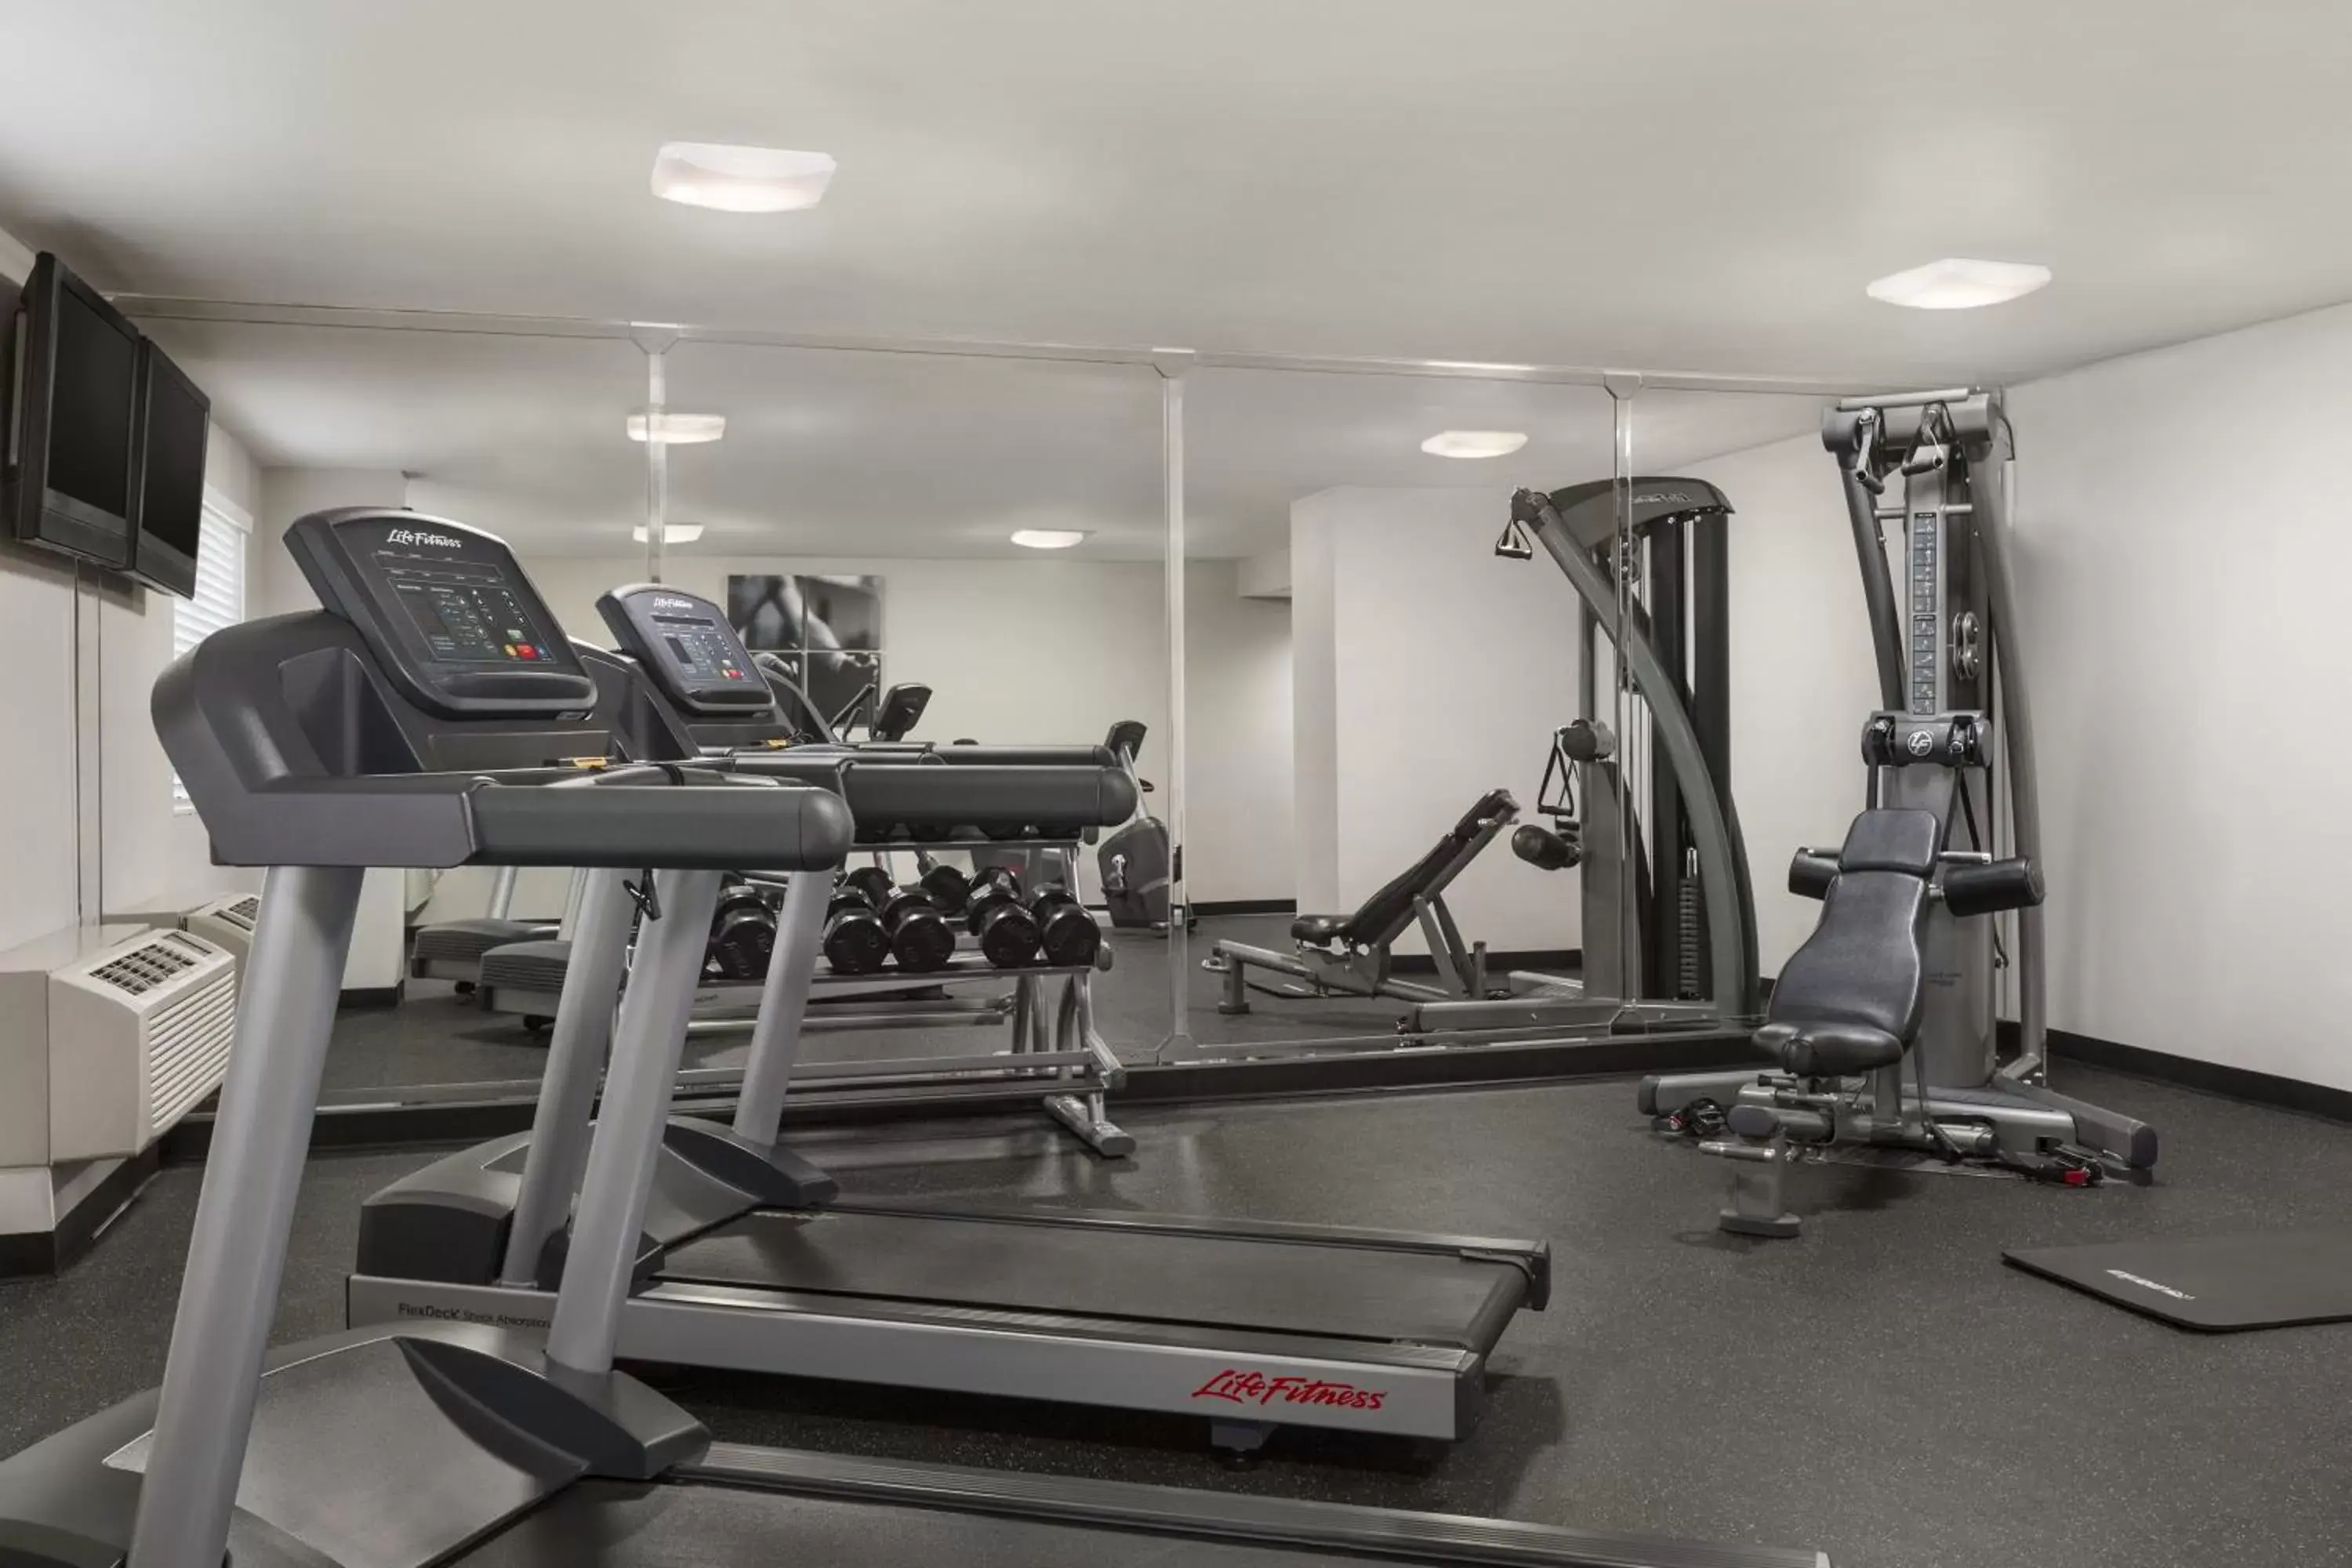 Fitness centre/facilities in Country Inn & Suites by Radisson, Atlanta Airport South, GA